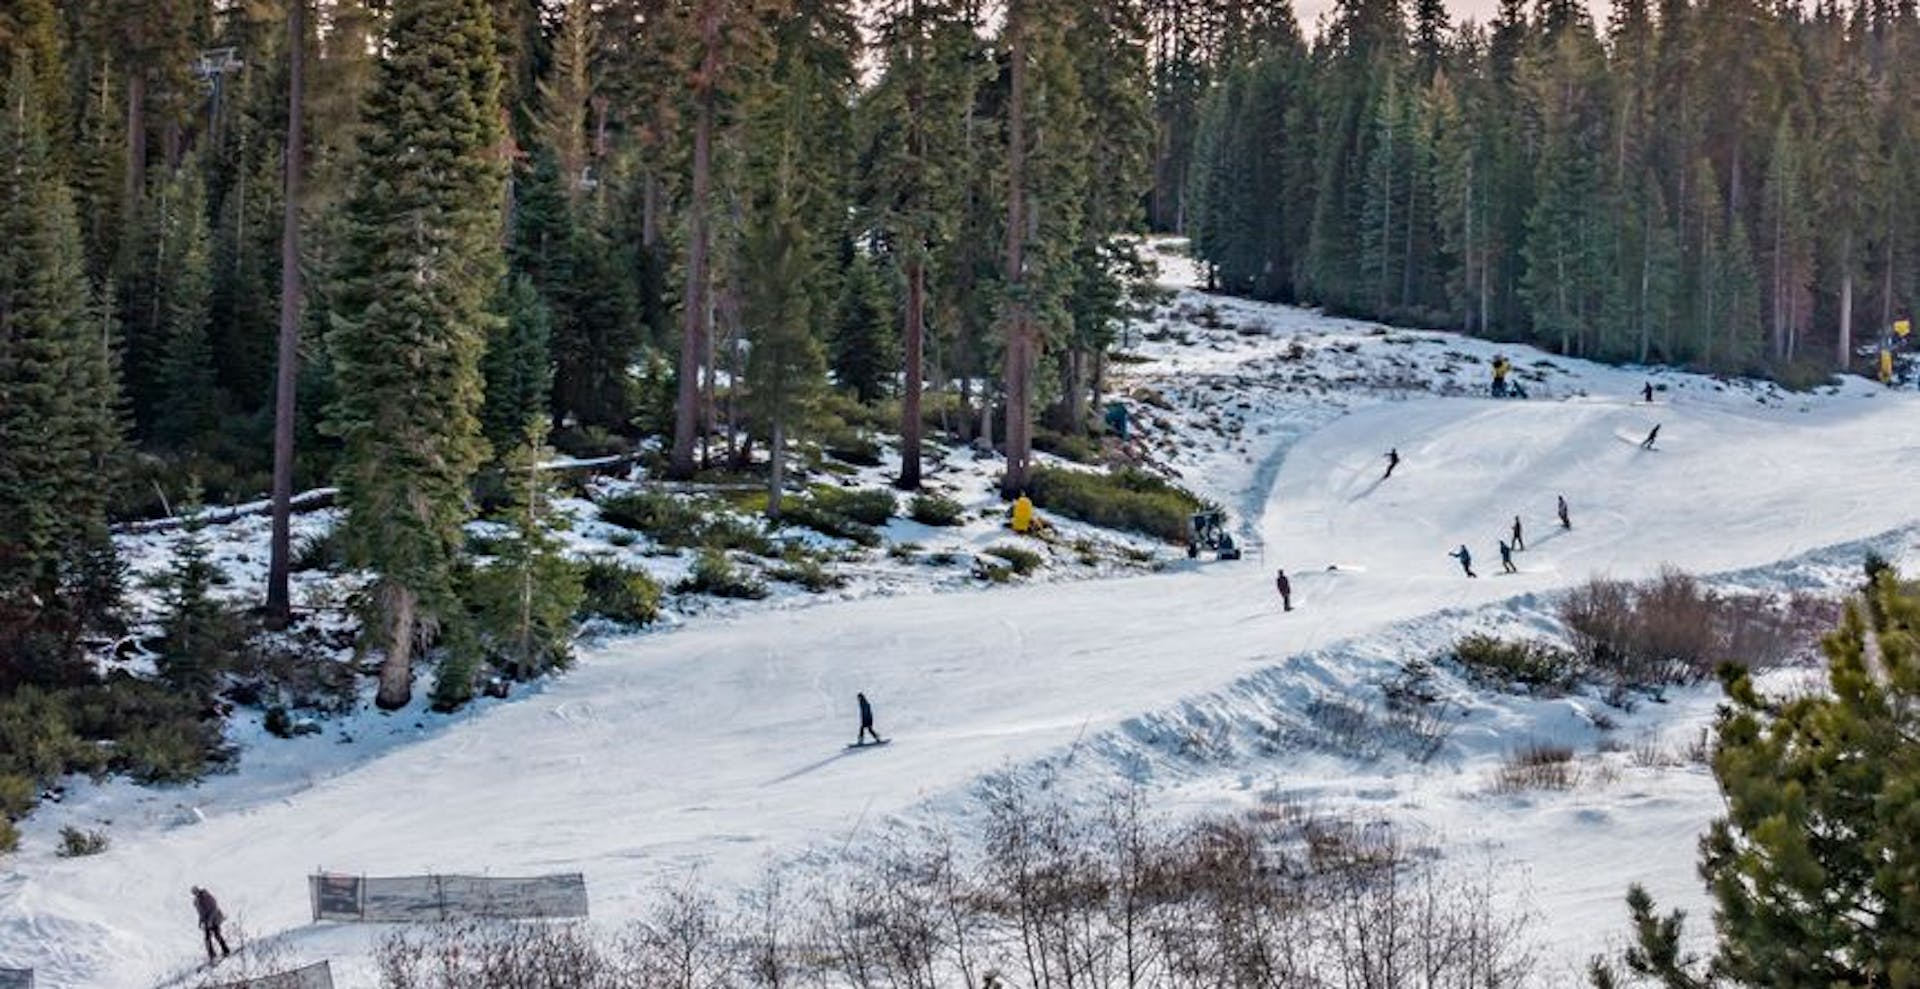 Northstar is California's family-friendly resort and offers exceptional intermediate terrain